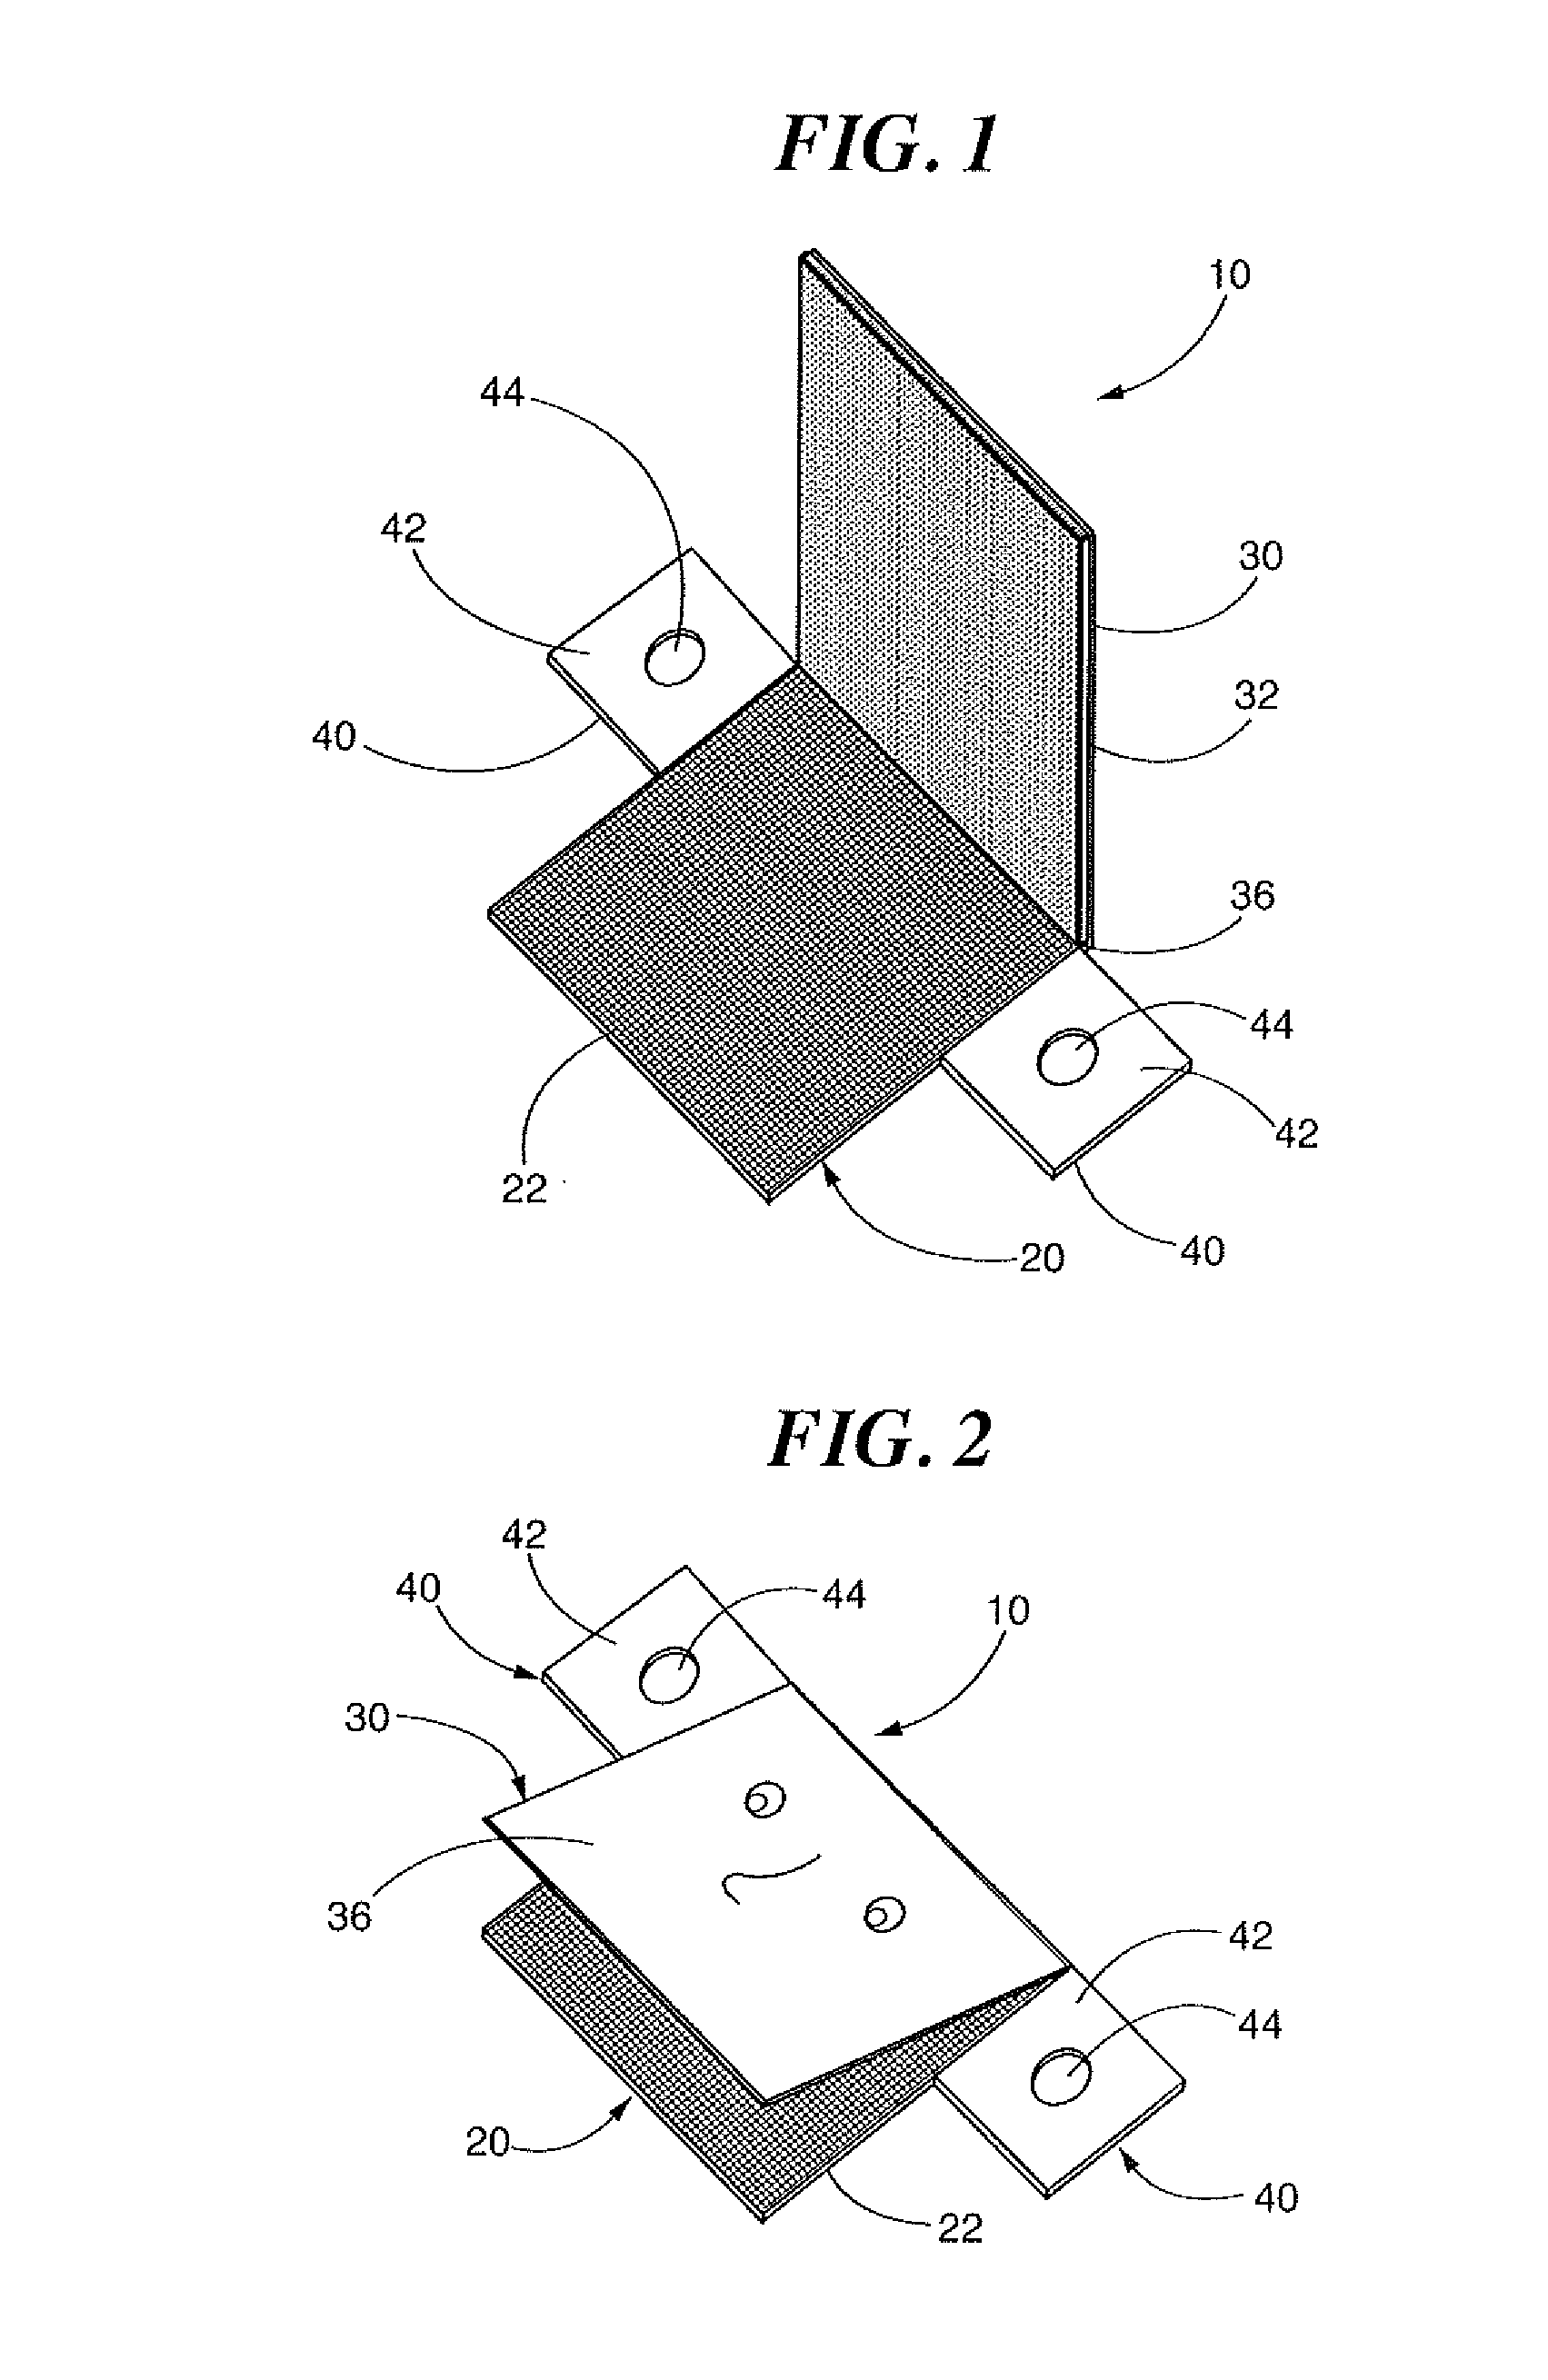 Device for maintaining a tied shoe lace knot